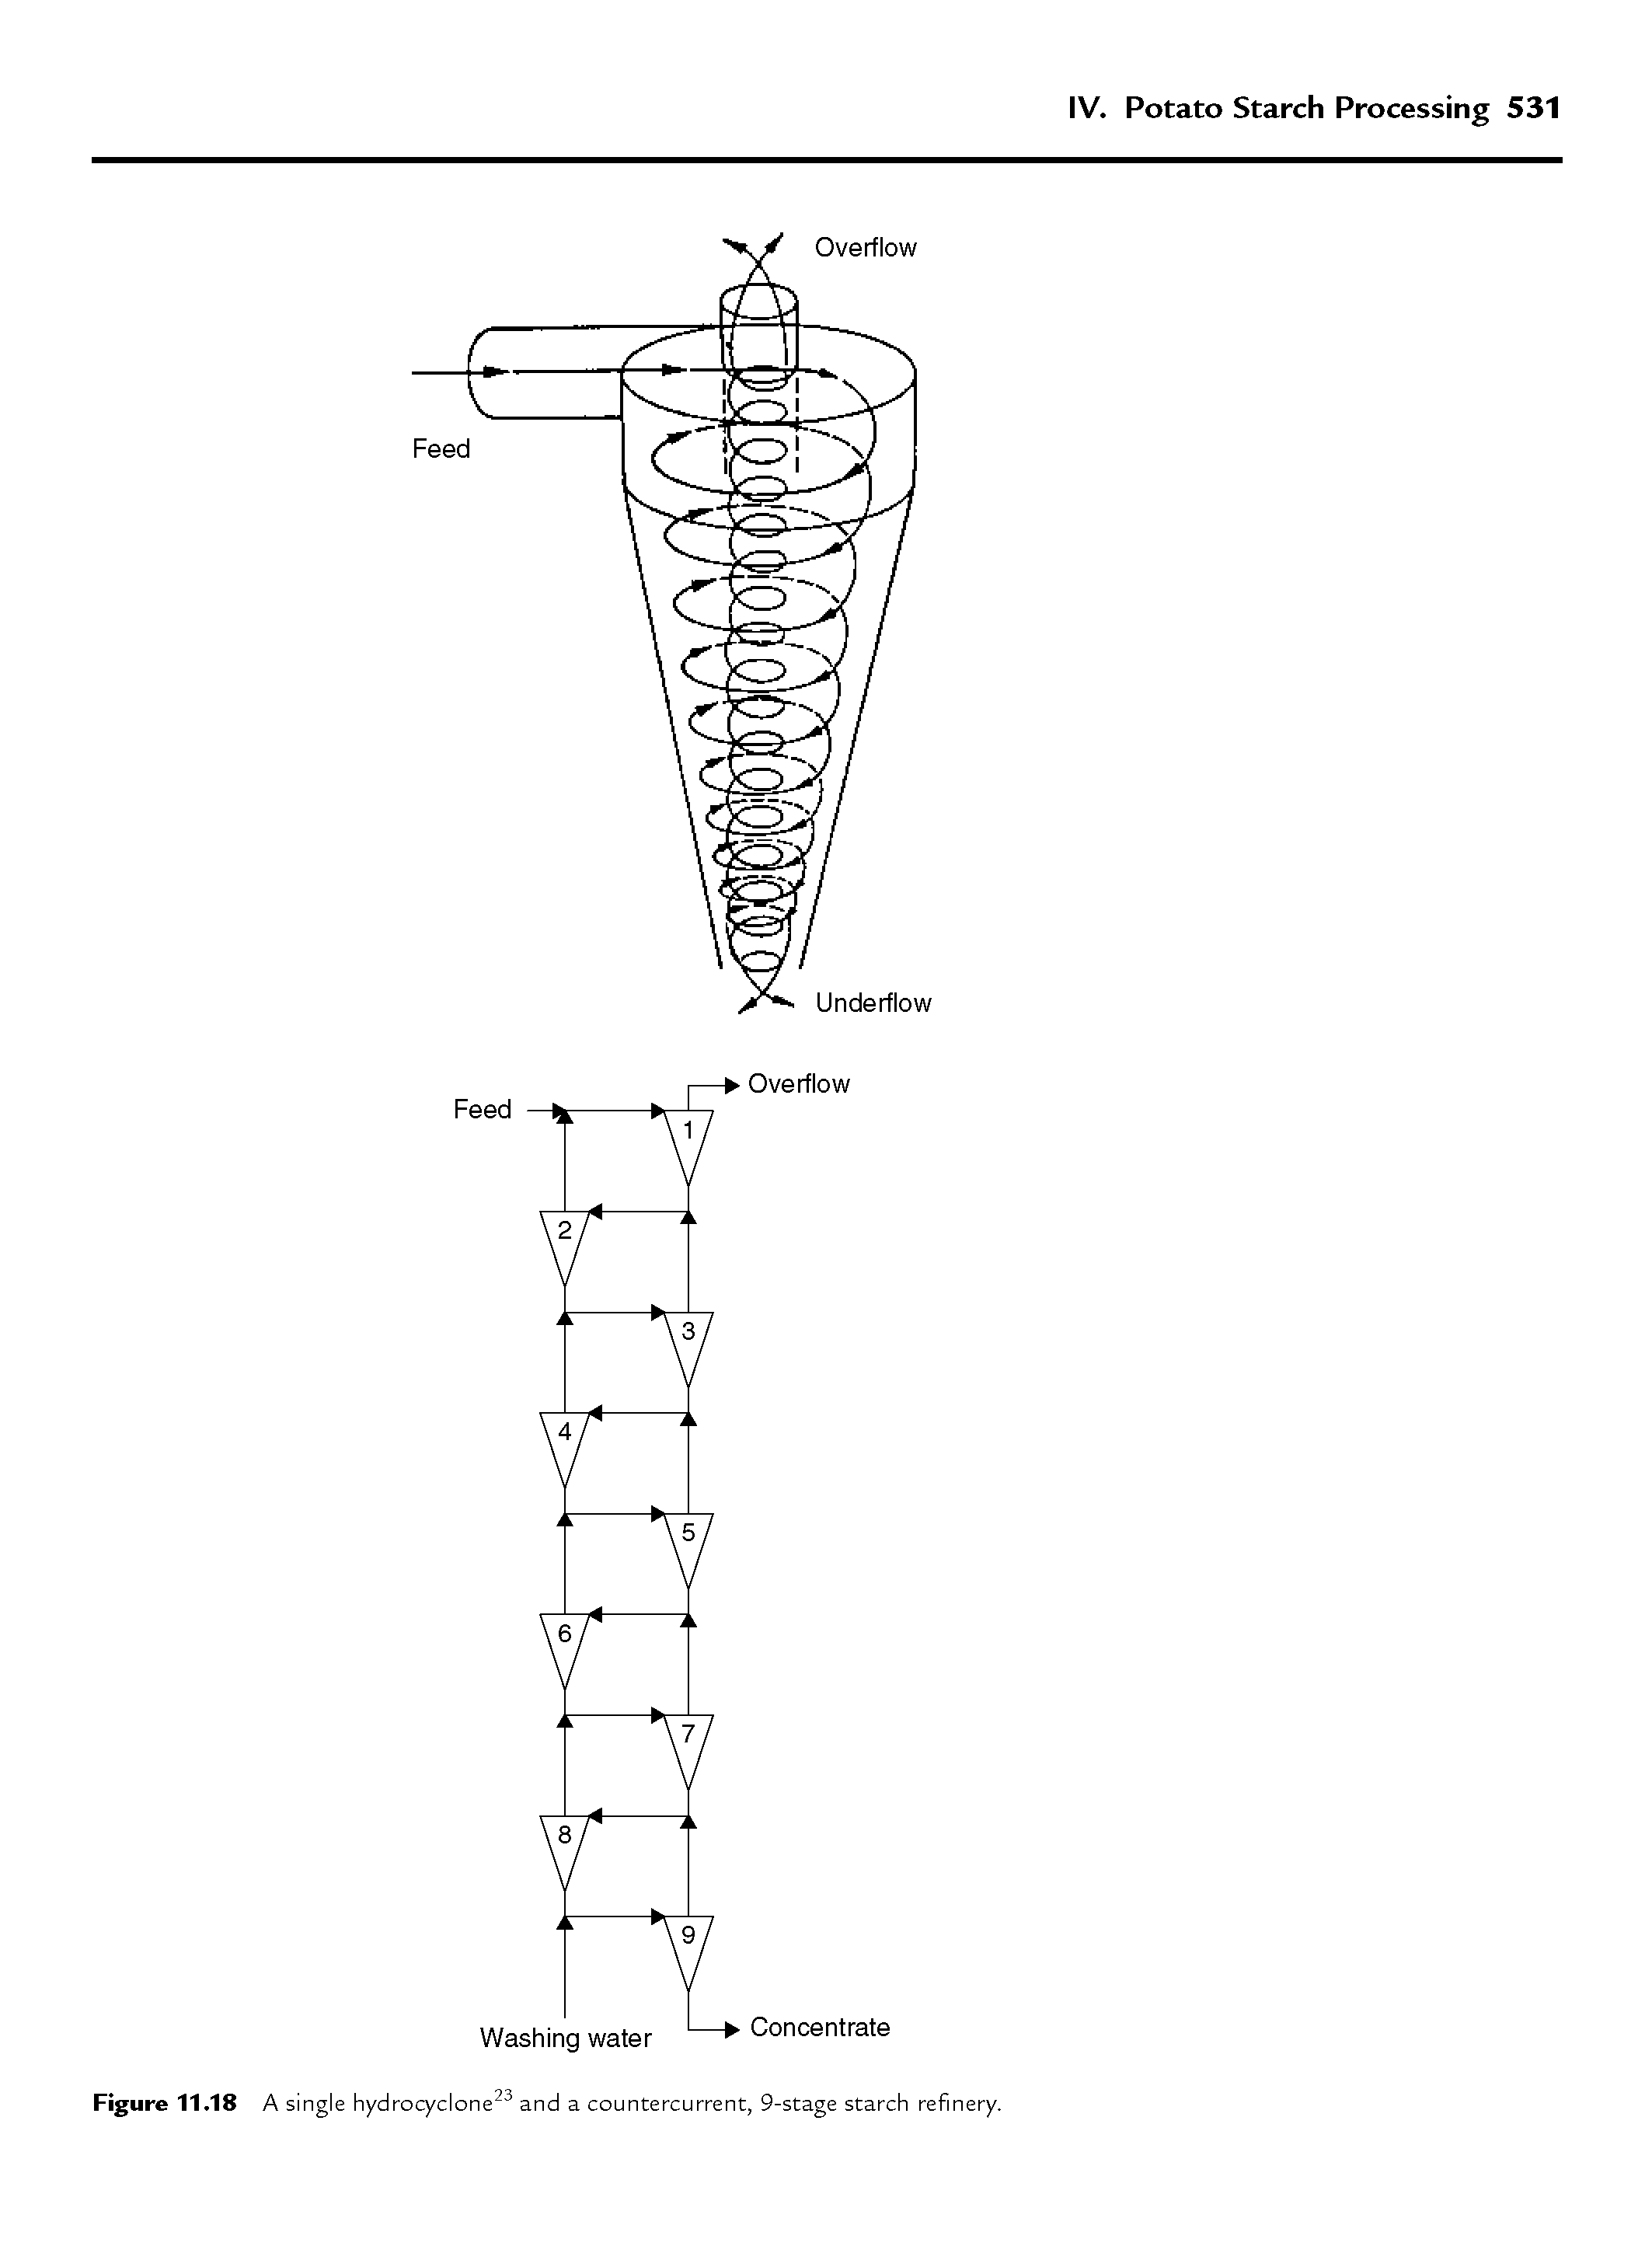 Figure 11.18 A single hydrocyclone23 and a countercurrent, 9-stage starch refinery.